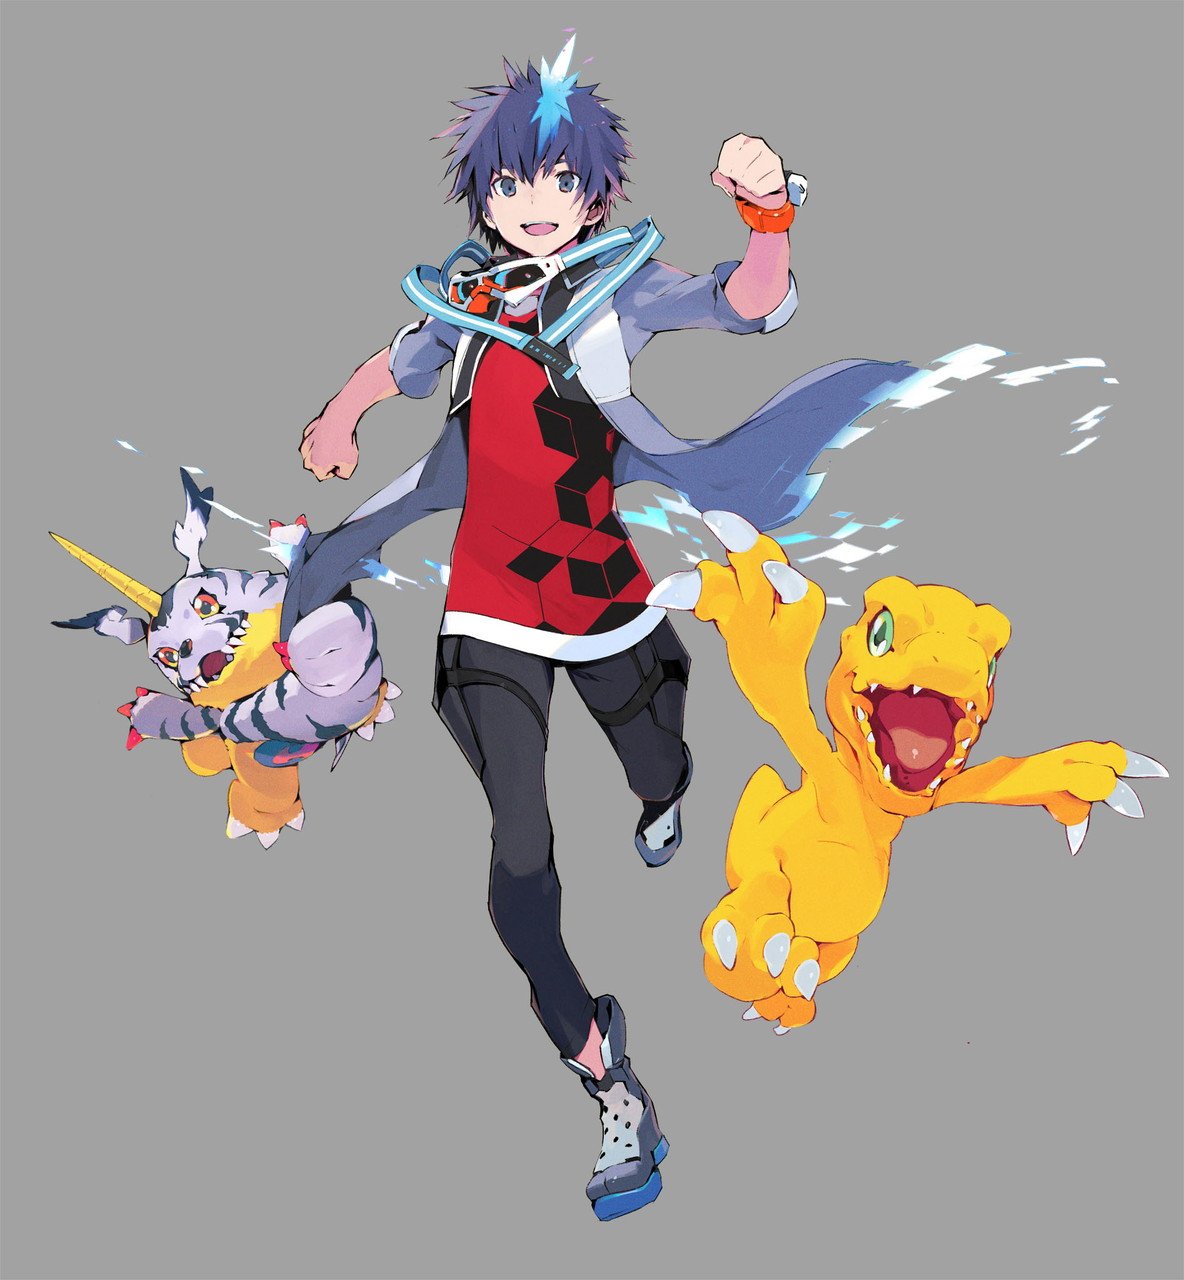 First look at Digimon World: Next Order